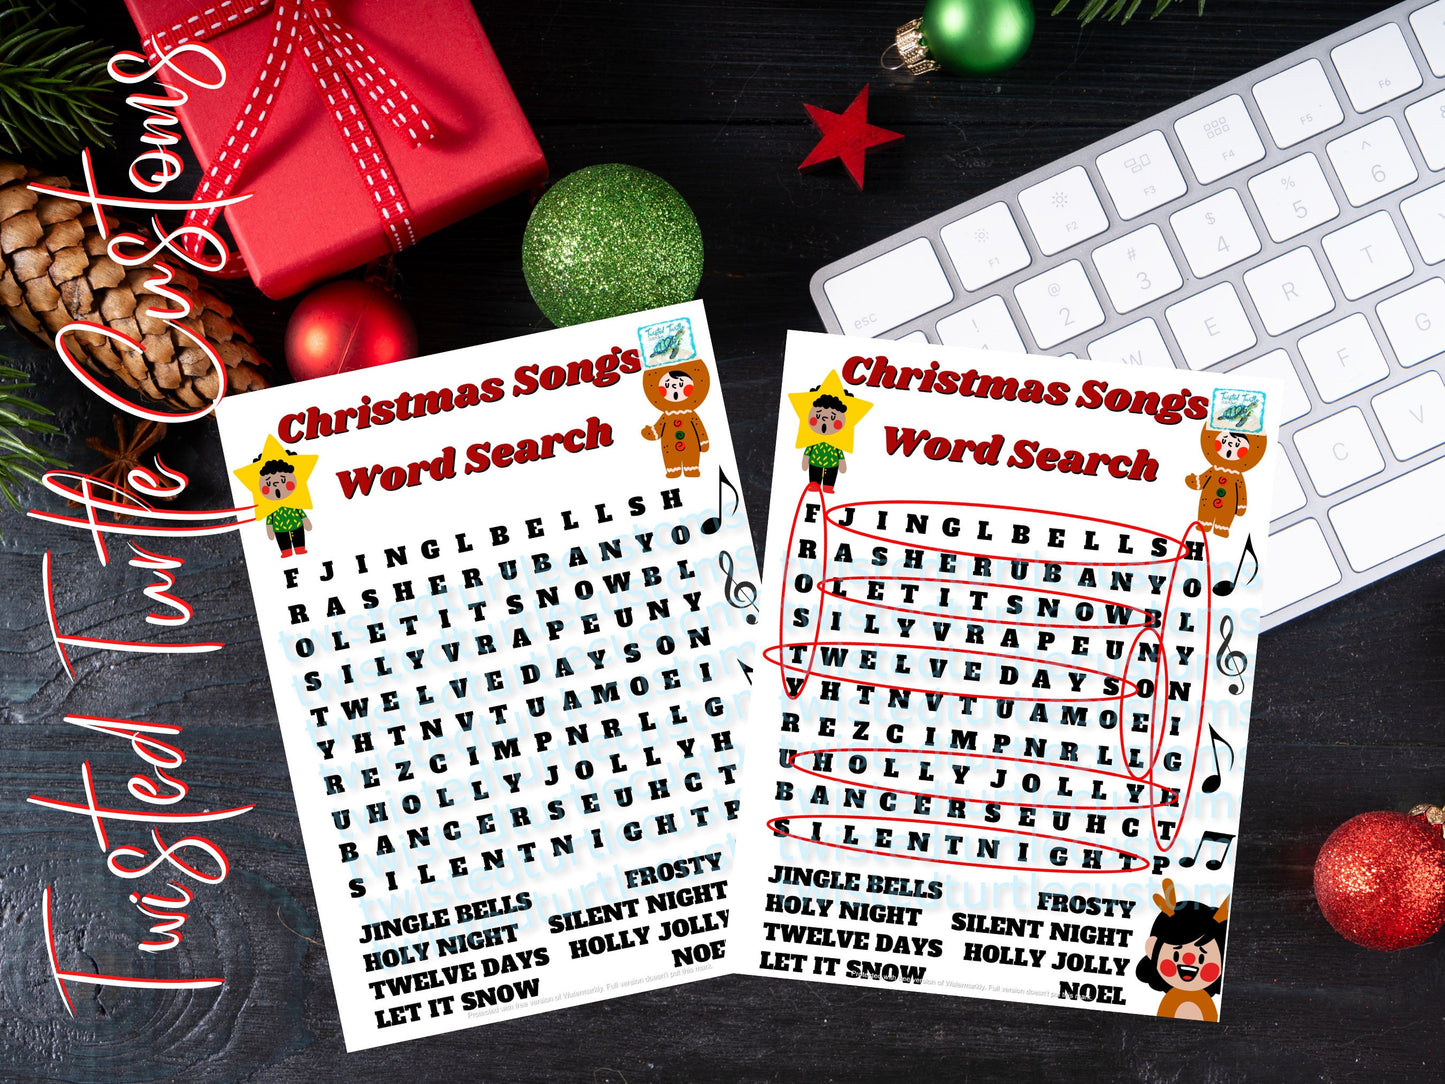 Christmas Songs Word Search Puzzle *DIGITAL DOWNLOAD ONLY*